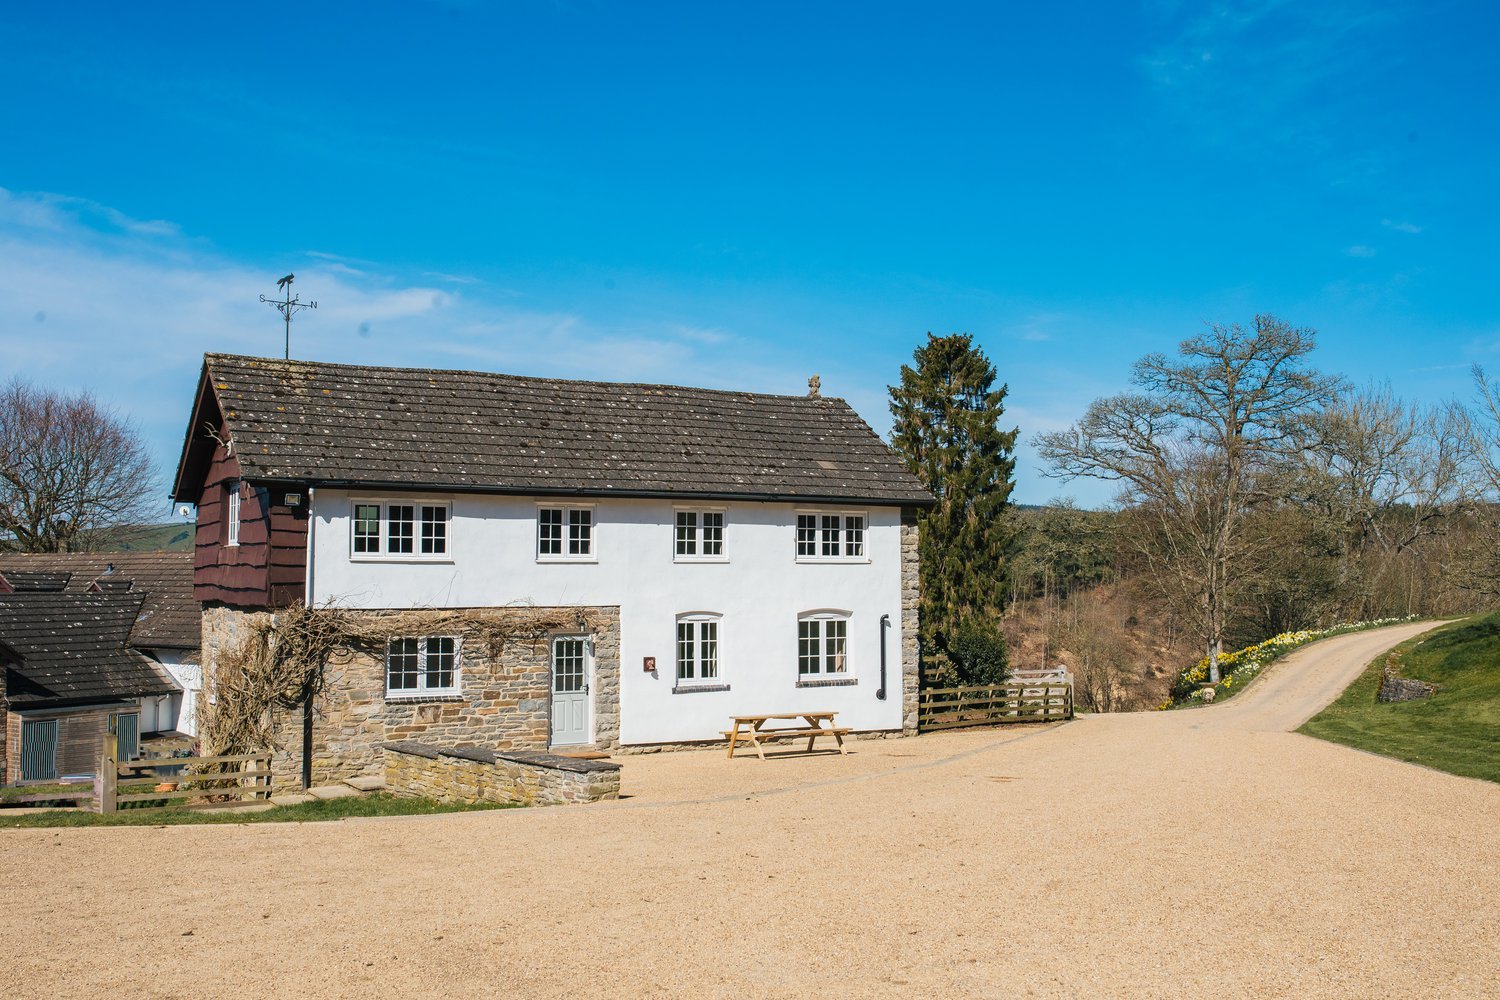 🌟 Looking for an unforgettable family holiday? Look no further than Great Hagley! With its stunning location in the South Shropshire countryside, Great Hagley offers an incredibly unique experience that will create lifelong memories for you and your